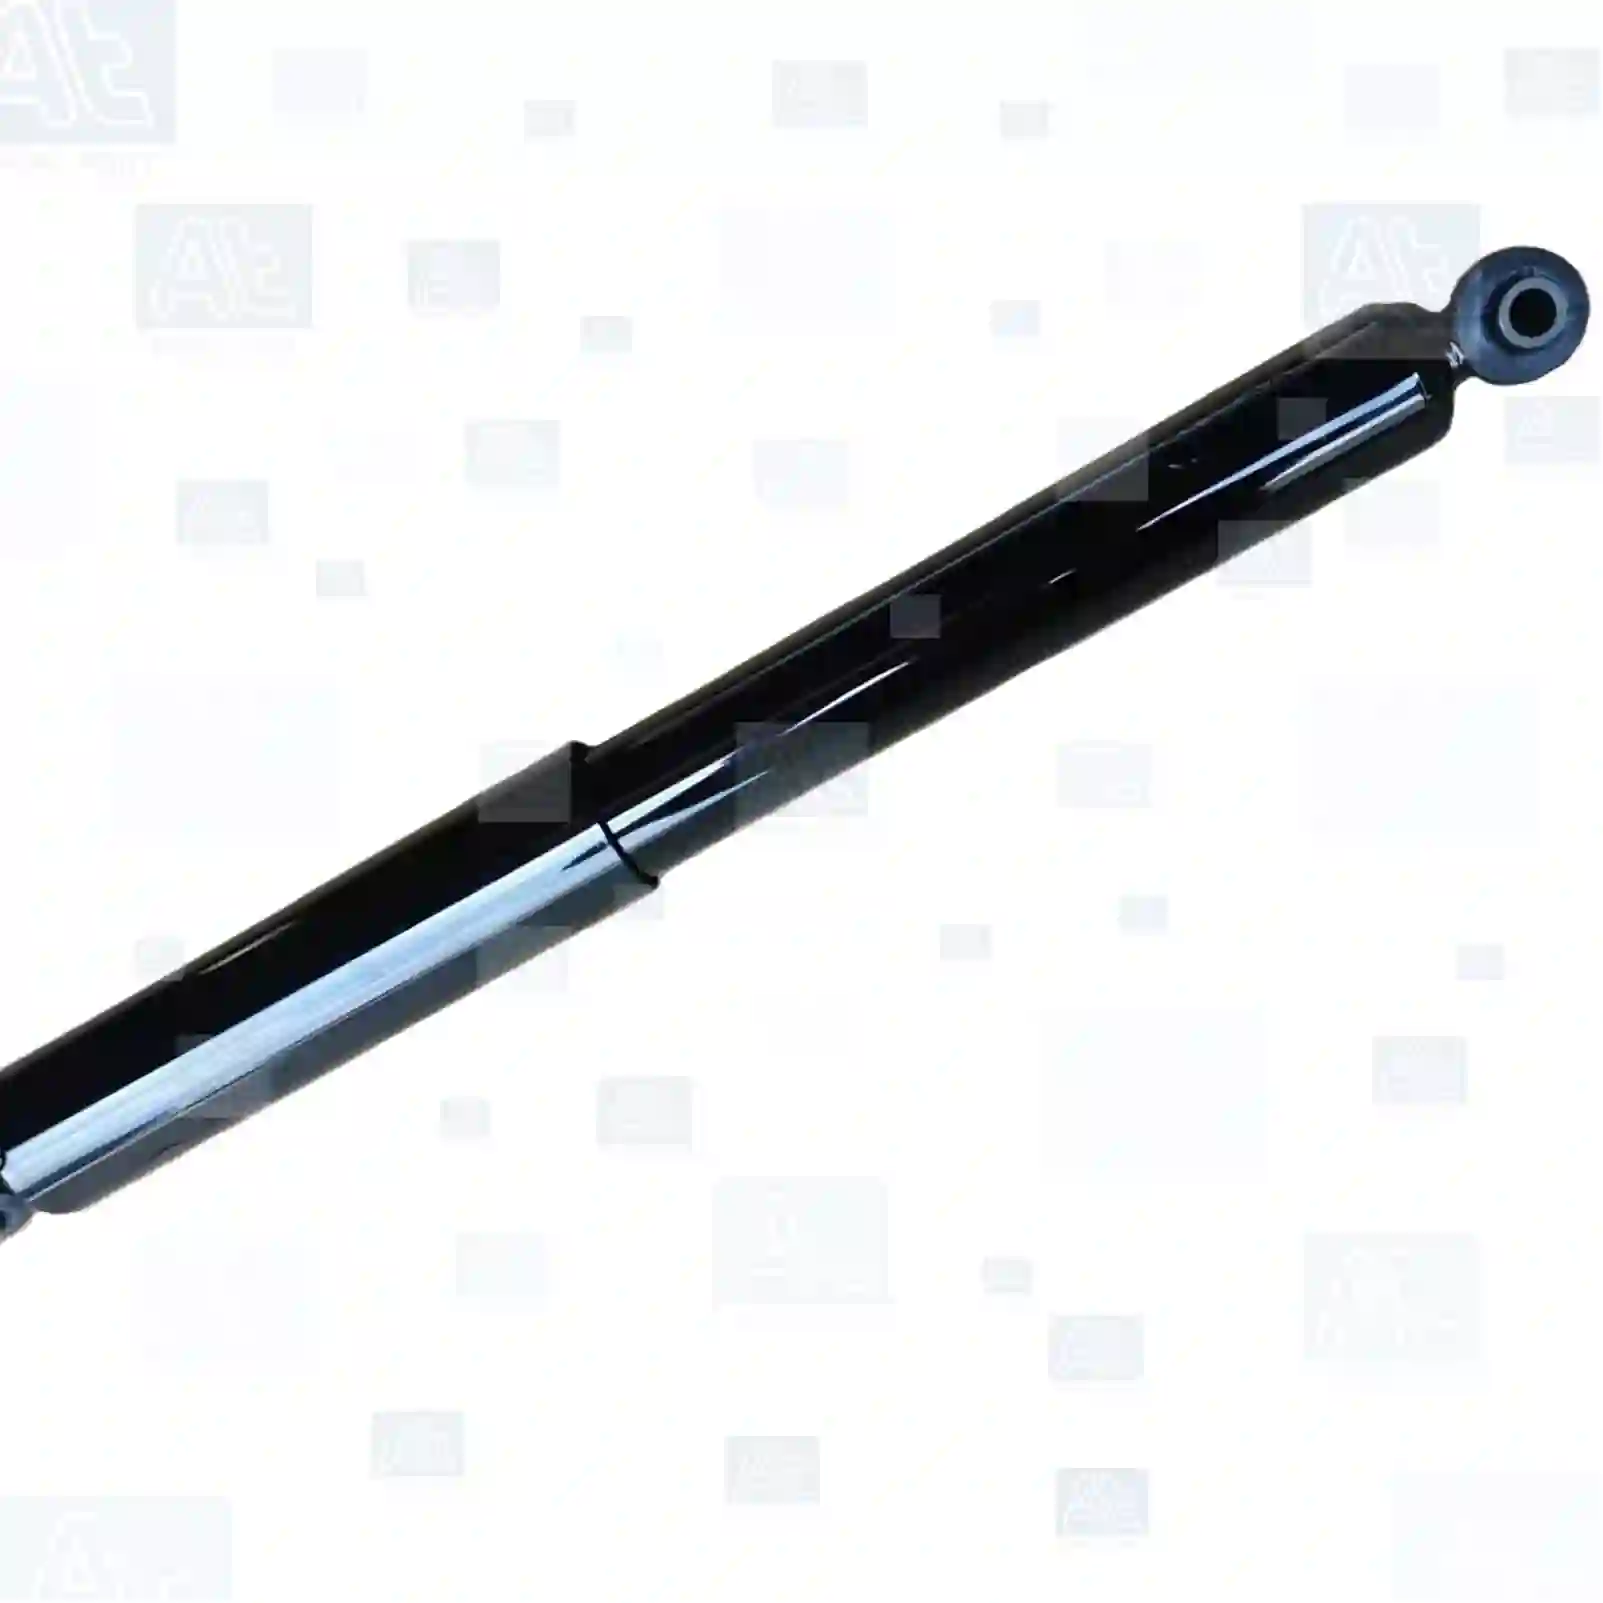 Shock absorber, at no 77727904, oem no: 2D0513029, 2D0513029A, 2D0513029B, 2D0513029D, 2D0513029E, 2D0513029F, 2D0513029G, 2D0513029J, 2D0513029Q, 5118646AA, 3023200431, 9013200031, 9013200043, 9013200231, 9013200431, 9013200631, 9013200731, 9033200131, 2D0513029, 2D0513029A, 2D0513029B, 2D0513029D, 2D0513029E, 2D0513029F, 2D0513029G, 2D0513029J, 2D0513029, 2D0513029A, 2D0513029B, 2D0513029D, 2D0513029E, 2D0513029F, 2D0513029G, 2D0513029J, 2D0513029, 2D0513029A, 2D0513029B, 2D0513029D, 2D0513029E, 2D0513029F, 2D0513029G, 2D0513029J, 2D0513029P, 2D0513029Q At Spare Part | Engine, Accelerator Pedal, Camshaft, Connecting Rod, Crankcase, Crankshaft, Cylinder Head, Engine Suspension Mountings, Exhaust Manifold, Exhaust Gas Recirculation, Filter Kits, Flywheel Housing, General Overhaul Kits, Engine, Intake Manifold, Oil Cleaner, Oil Cooler, Oil Filter, Oil Pump, Oil Sump, Piston & Liner, Sensor & Switch, Timing Case, Turbocharger, Cooling System, Belt Tensioner, Coolant Filter, Coolant Pipe, Corrosion Prevention Agent, Drive, Expansion Tank, Fan, Intercooler, Monitors & Gauges, Radiator, Thermostat, V-Belt / Timing belt, Water Pump, Fuel System, Electronical Injector Unit, Feed Pump, Fuel Filter, cpl., Fuel Gauge Sender,  Fuel Line, Fuel Pump, Fuel Tank, Injection Line Kit, Injection Pump, Exhaust System, Clutch & Pedal, Gearbox, Propeller Shaft, Axles, Brake System, Hubs & Wheels, Suspension, Leaf Spring, Universal Parts / Accessories, Steering, Electrical System, Cabin Shock absorber, at no 77727904, oem no: 2D0513029, 2D0513029A, 2D0513029B, 2D0513029D, 2D0513029E, 2D0513029F, 2D0513029G, 2D0513029J, 2D0513029Q, 5118646AA, 3023200431, 9013200031, 9013200043, 9013200231, 9013200431, 9013200631, 9013200731, 9033200131, 2D0513029, 2D0513029A, 2D0513029B, 2D0513029D, 2D0513029E, 2D0513029F, 2D0513029G, 2D0513029J, 2D0513029, 2D0513029A, 2D0513029B, 2D0513029D, 2D0513029E, 2D0513029F, 2D0513029G, 2D0513029J, 2D0513029, 2D0513029A, 2D0513029B, 2D0513029D, 2D0513029E, 2D0513029F, 2D0513029G, 2D0513029J, 2D0513029P, 2D0513029Q At Spare Part | Engine, Accelerator Pedal, Camshaft, Connecting Rod, Crankcase, Crankshaft, Cylinder Head, Engine Suspension Mountings, Exhaust Manifold, Exhaust Gas Recirculation, Filter Kits, Flywheel Housing, General Overhaul Kits, Engine, Intake Manifold, Oil Cleaner, Oil Cooler, Oil Filter, Oil Pump, Oil Sump, Piston & Liner, Sensor & Switch, Timing Case, Turbocharger, Cooling System, Belt Tensioner, Coolant Filter, Coolant Pipe, Corrosion Prevention Agent, Drive, Expansion Tank, Fan, Intercooler, Monitors & Gauges, Radiator, Thermostat, V-Belt / Timing belt, Water Pump, Fuel System, Electronical Injector Unit, Feed Pump, Fuel Filter, cpl., Fuel Gauge Sender,  Fuel Line, Fuel Pump, Fuel Tank, Injection Line Kit, Injection Pump, Exhaust System, Clutch & Pedal, Gearbox, Propeller Shaft, Axles, Brake System, Hubs & Wheels, Suspension, Leaf Spring, Universal Parts / Accessories, Steering, Electrical System, Cabin